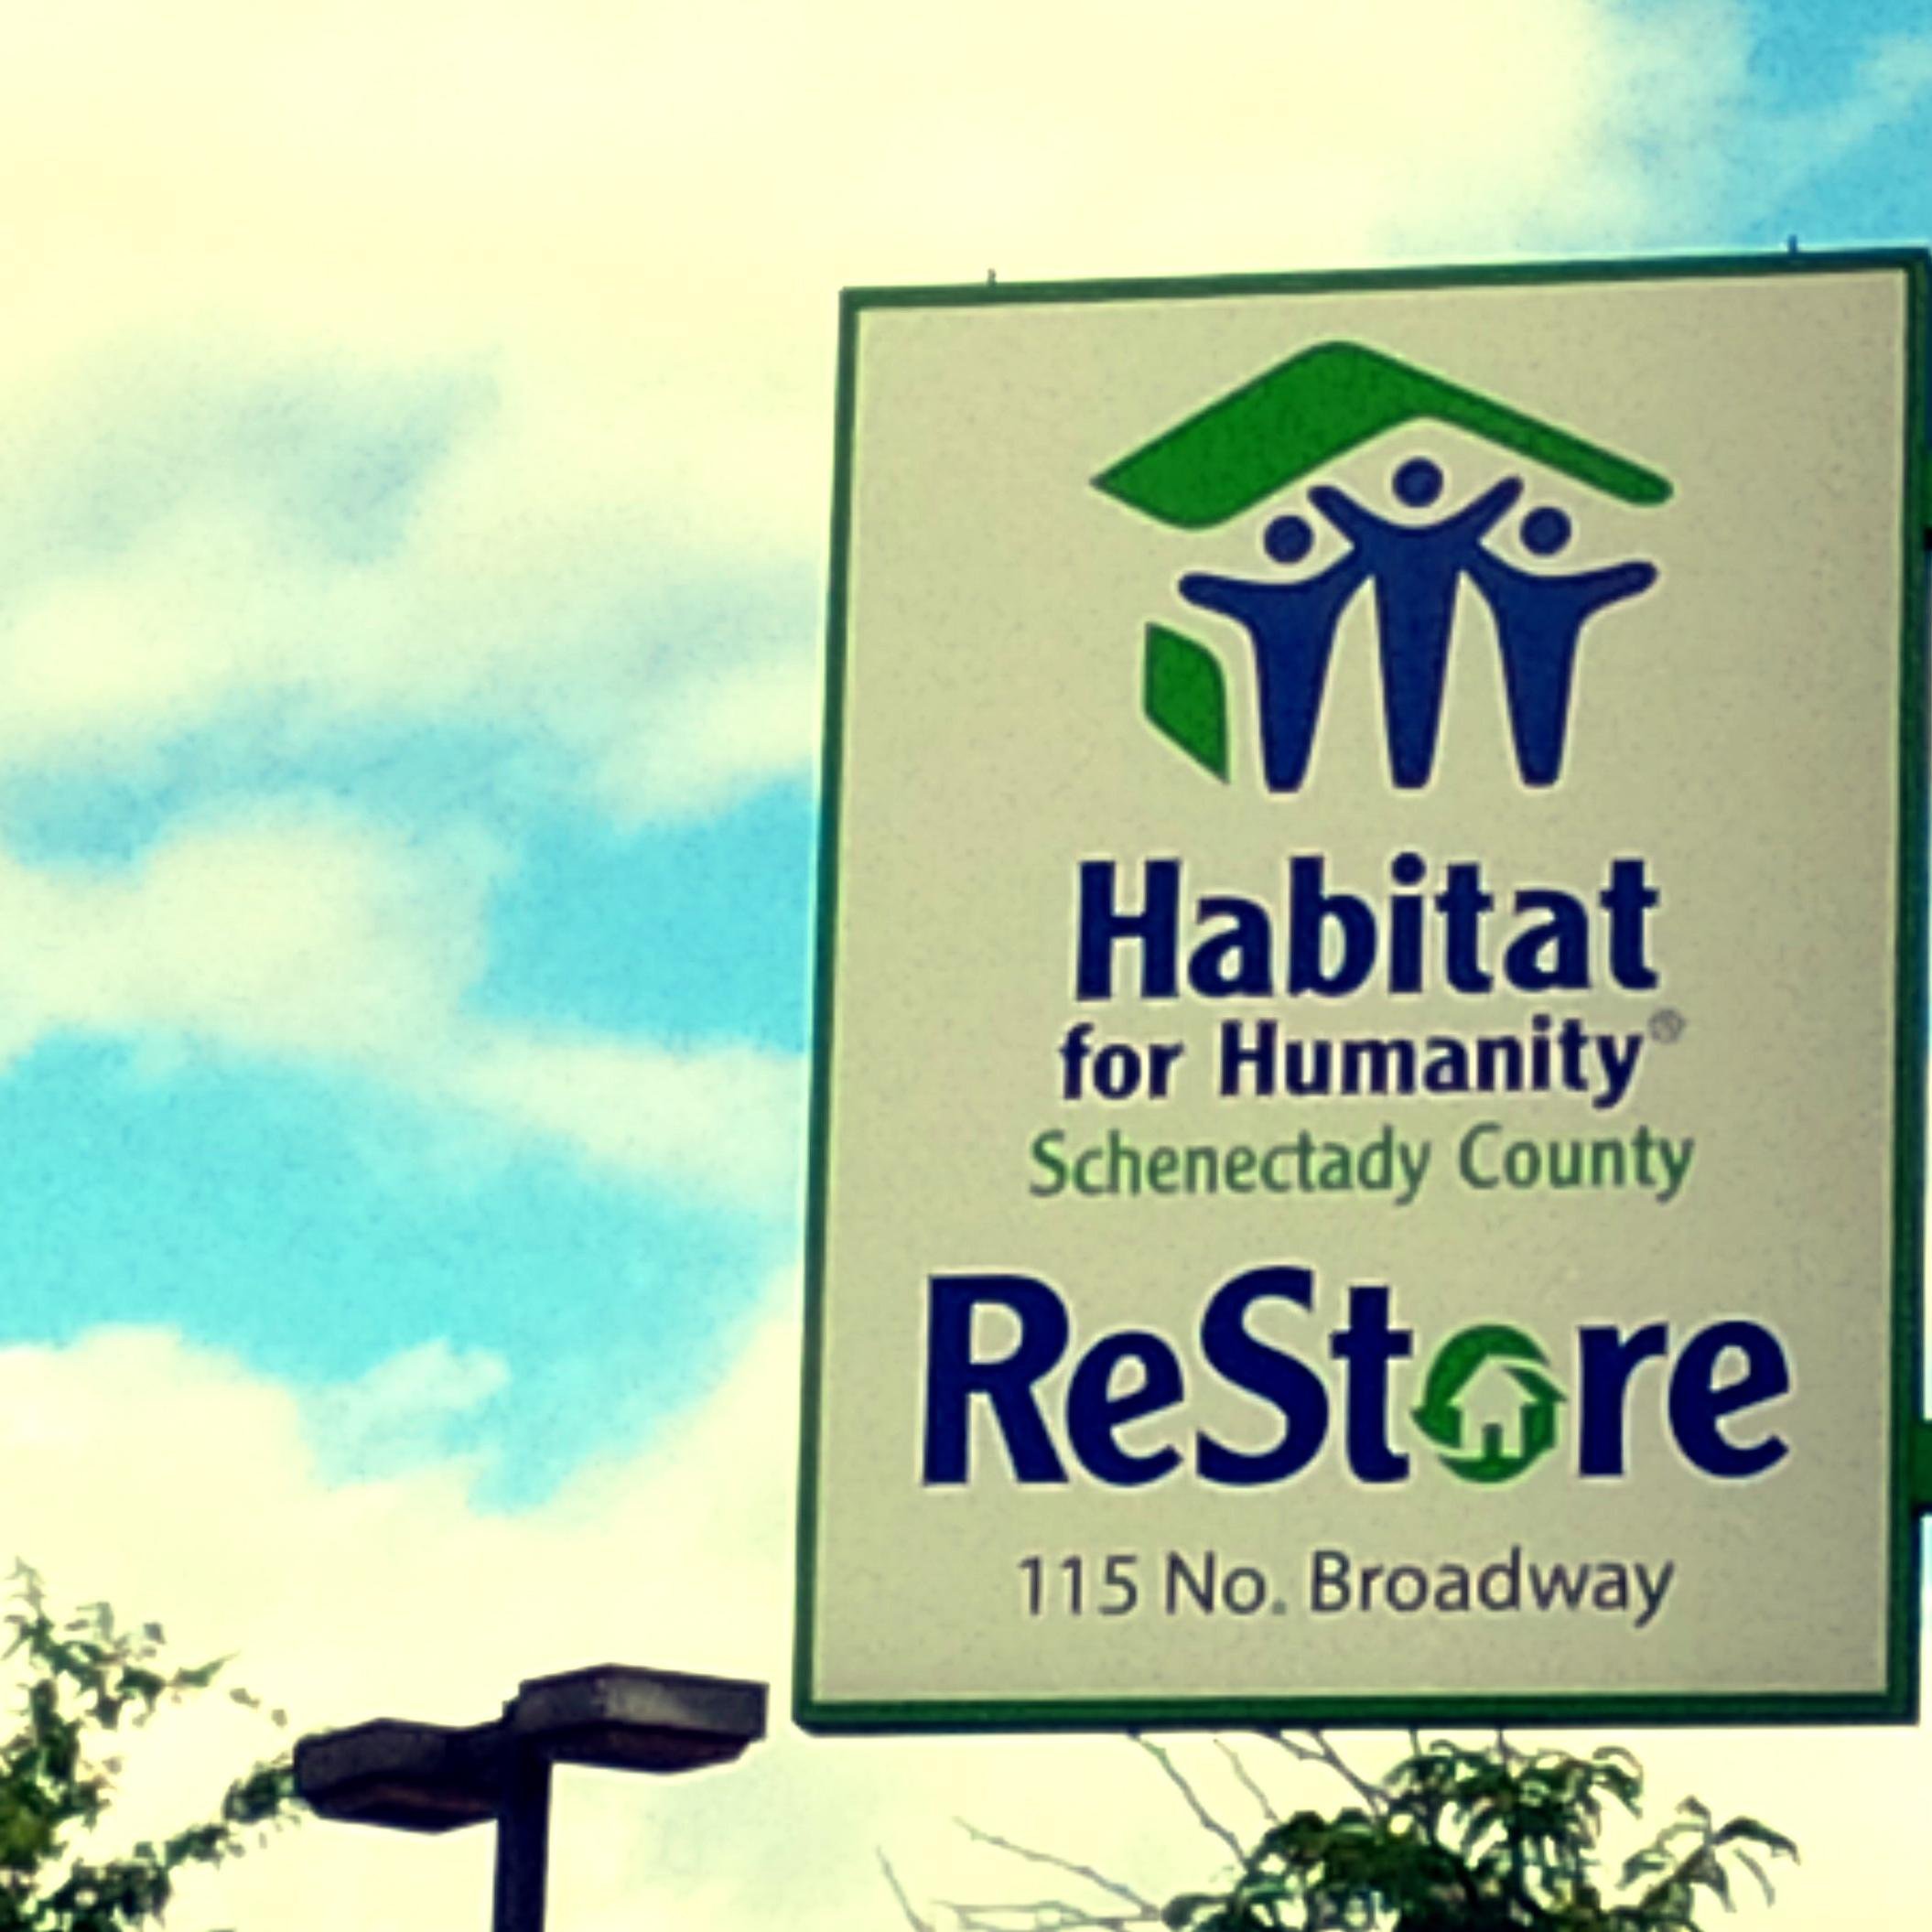 The ReStore is a nonprofit home improvement store and donation center that sells new and gently used household items to the public at a fraction of retail costs